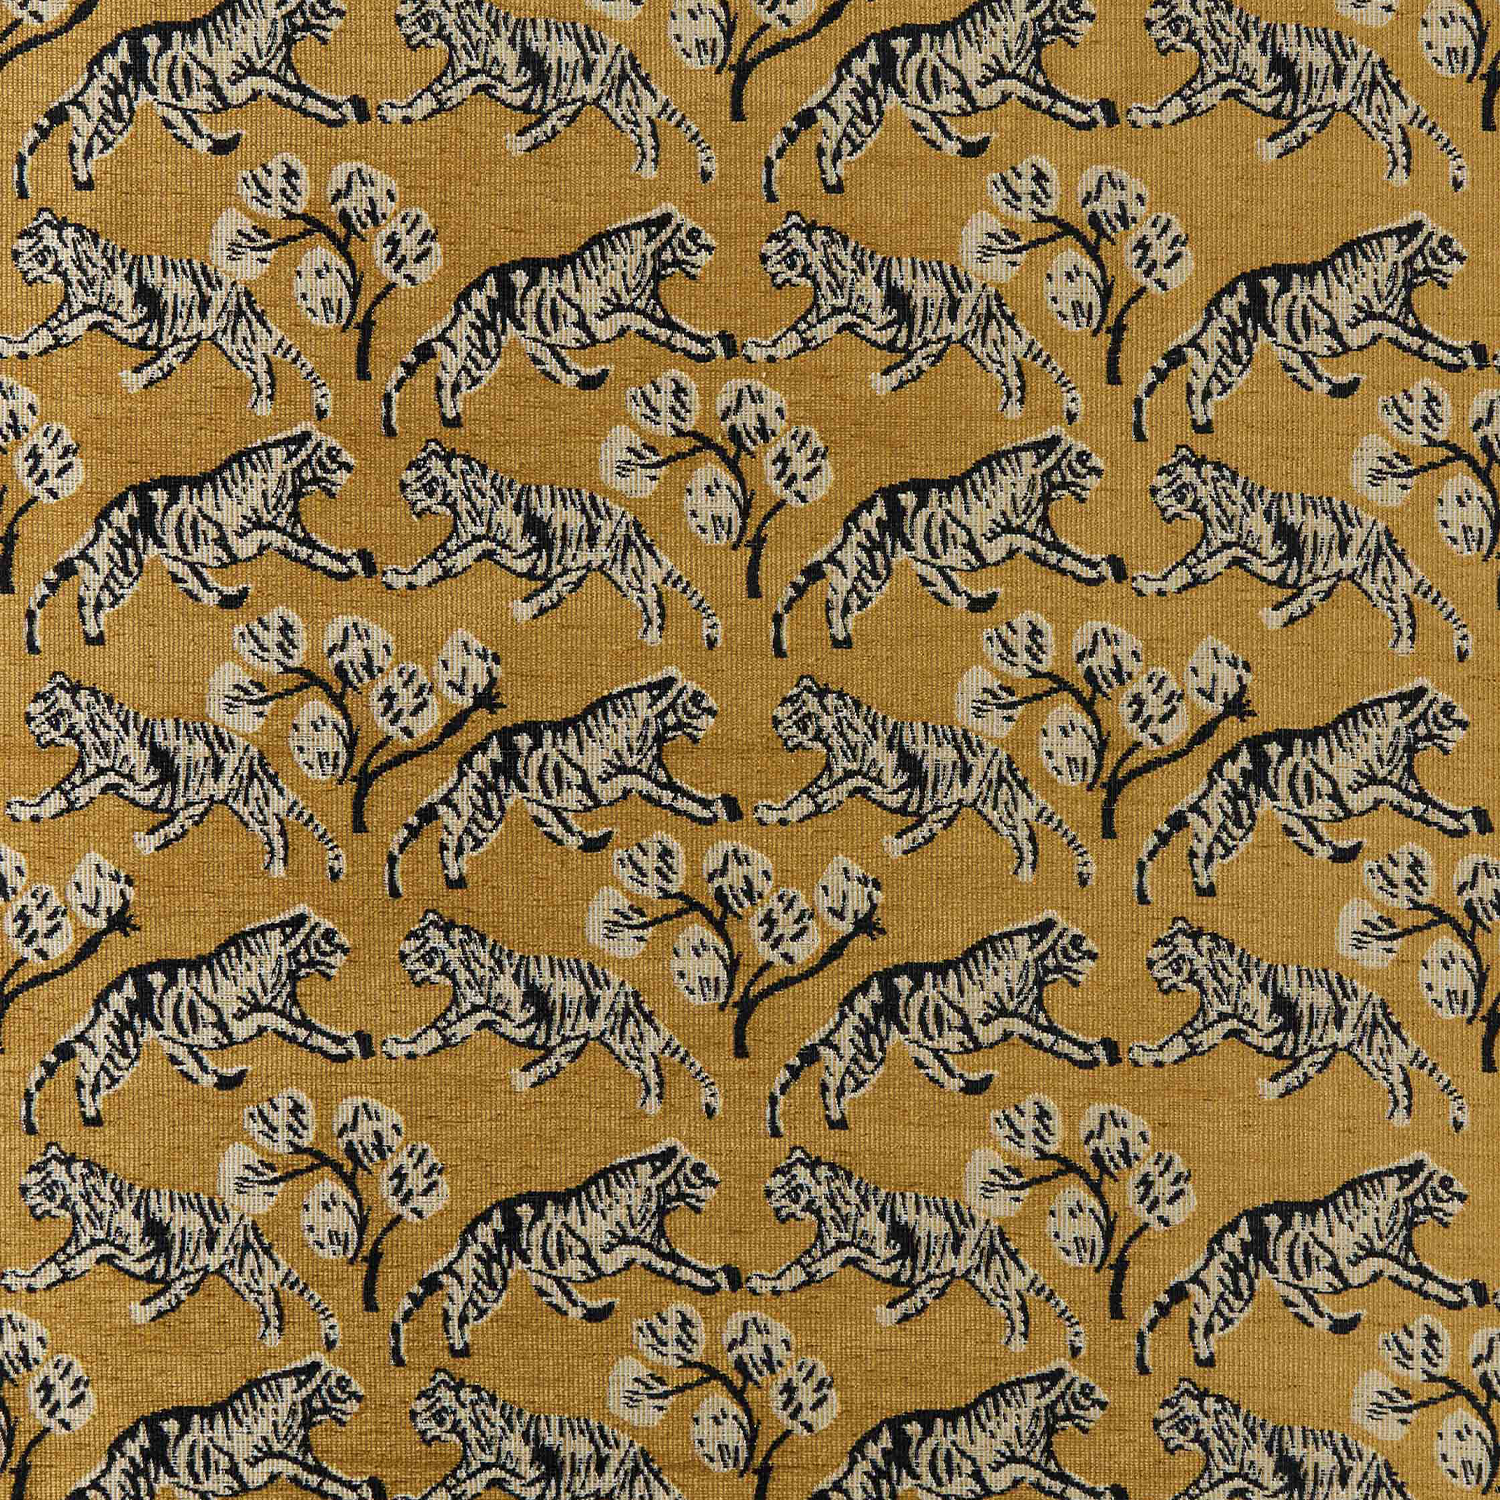 Tiger Jacquard Fabric in ochre gold by Sarah Sherman Samuels for Lulu and Georgia